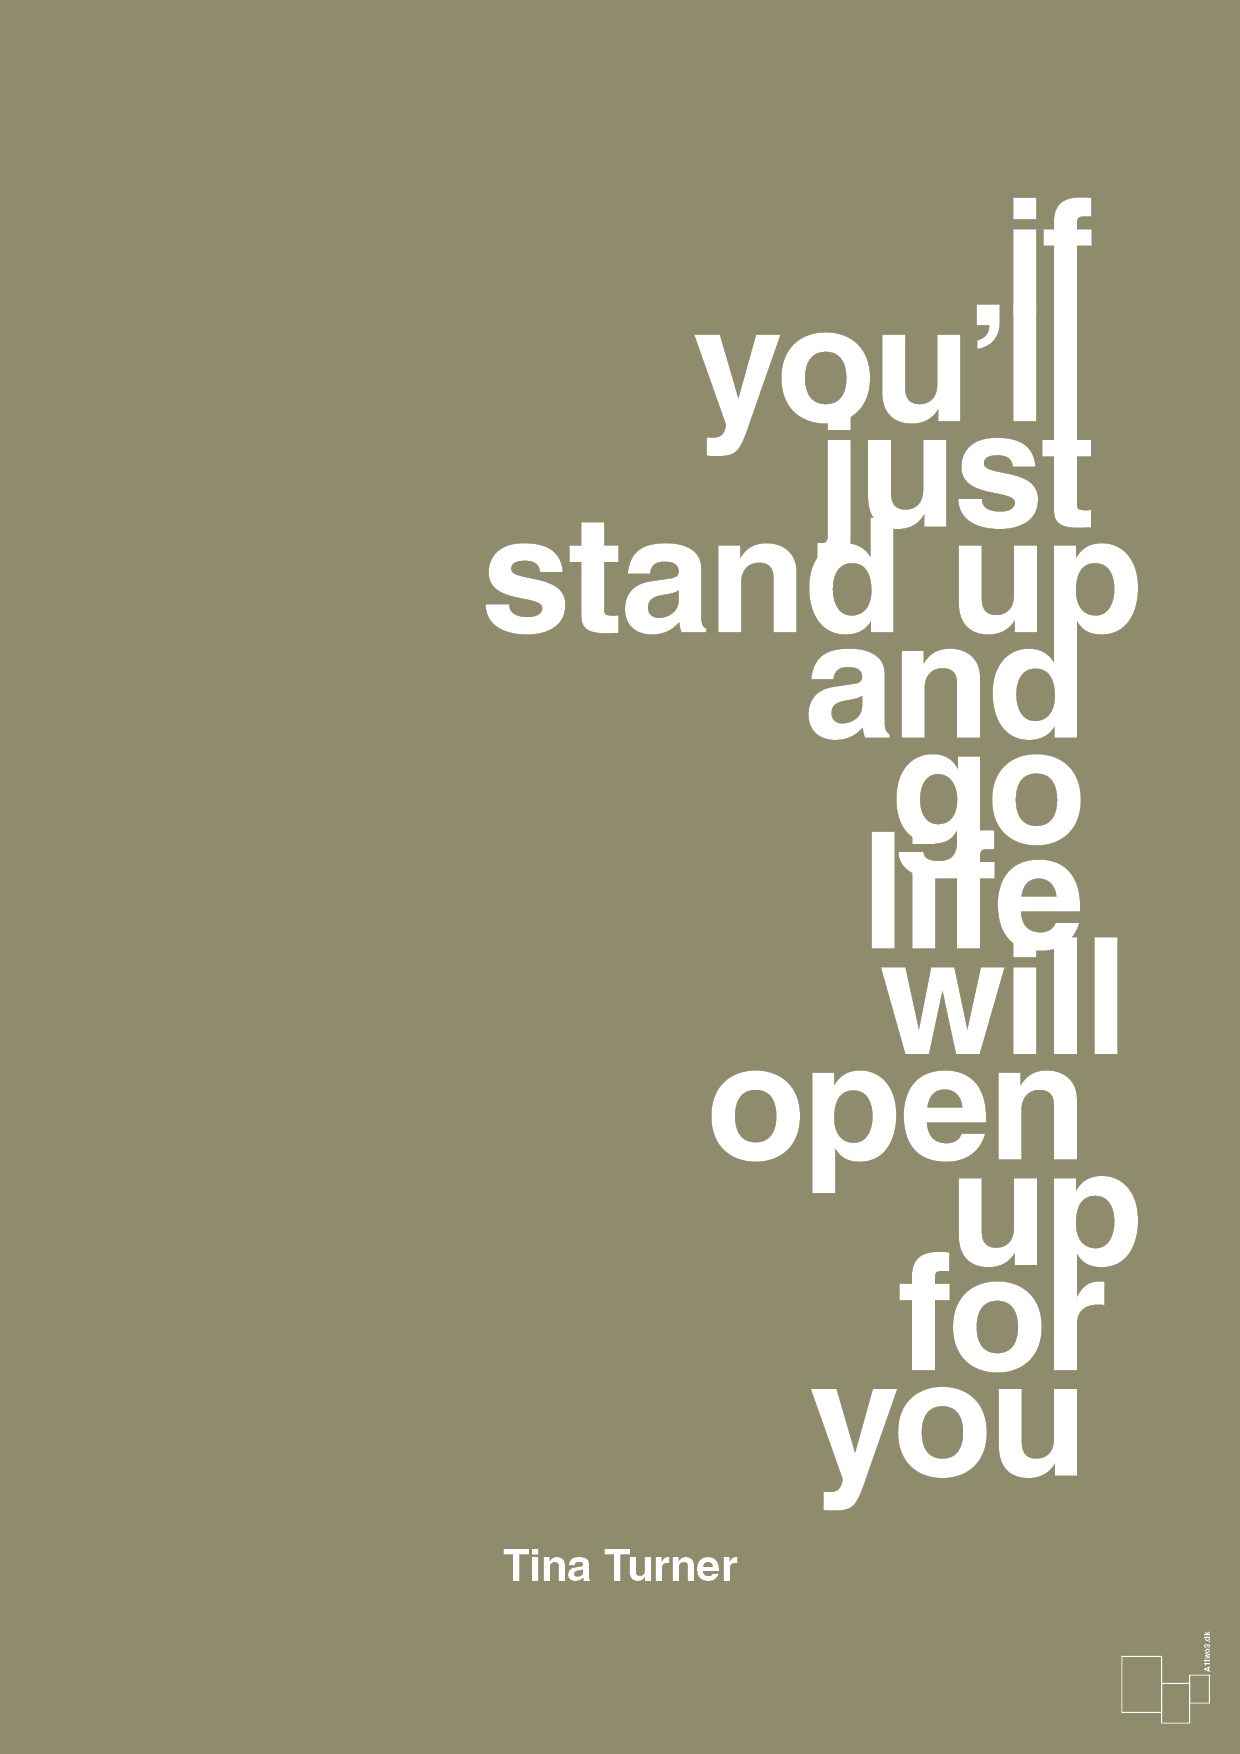 if you’ll just stand up and go life will open up for you - Plakat med Citater i Misty Forrest